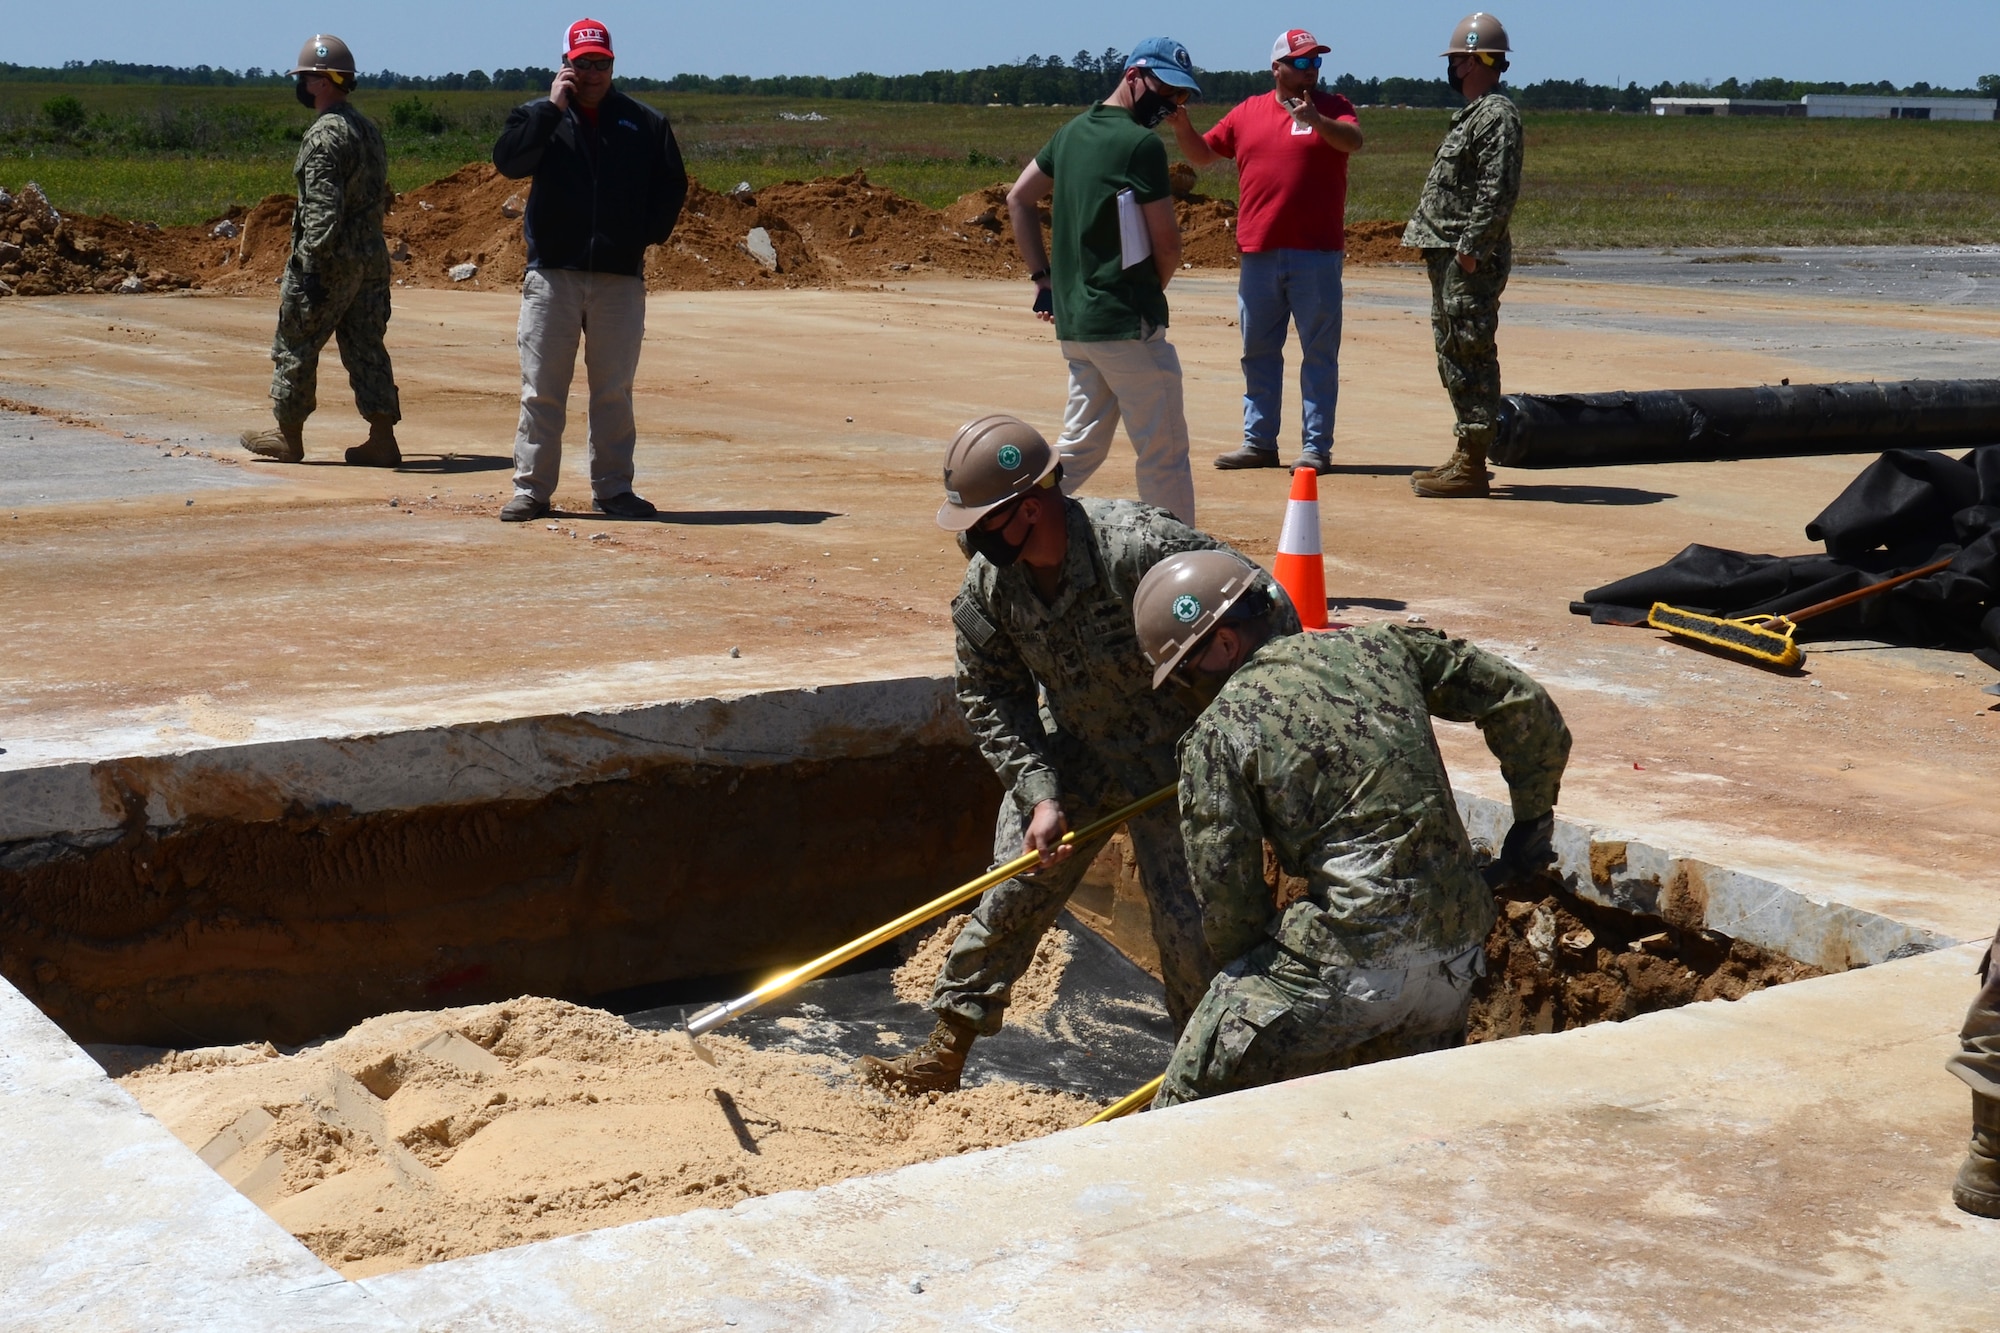 U.S. Navy engineers from Navy Mobile Construction Battalion 133, Gulfport, Mississippi, fill in an excavated hole during an Expedient and Expeditionary Airfield Damage Repair (E-ADR) Joint Capability Technology Demonstration at McEntire Joint National Guard Base, South Carolina, April 22, 2021. The demonstration field tests the “just enough, just-in-time” repair capability on a decommissioned runway at McEntire Joint National Guard Base. The Department of Defense’s E-ADR concept uses local materials and minimal personnel and equipment in order to expedite a temporary runway repair. (U.S. Air National Guard photo by Lt. Col. Jim St.Clair, 169th Fighter Wing Public Affairs)